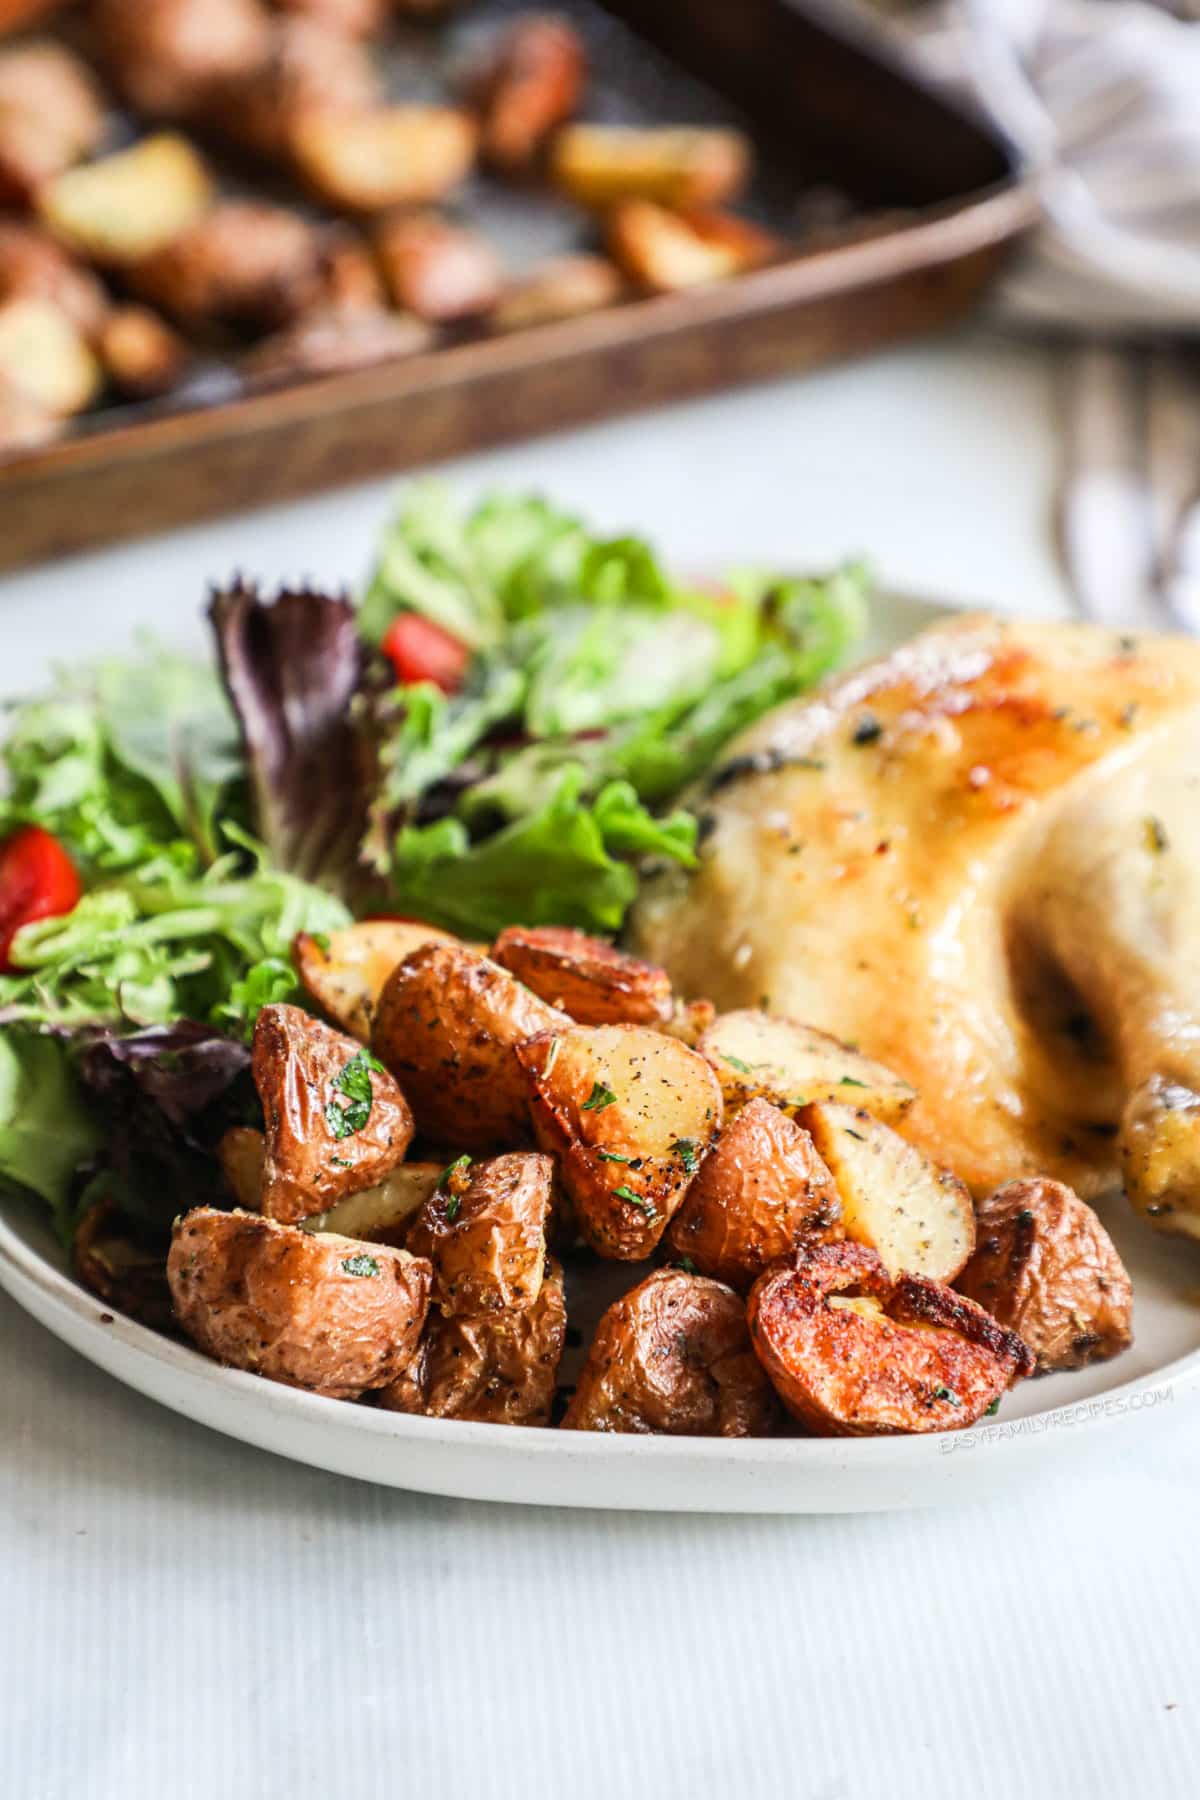 Herb Roasted Red Potatoes served with dutch oven chicken and house salad